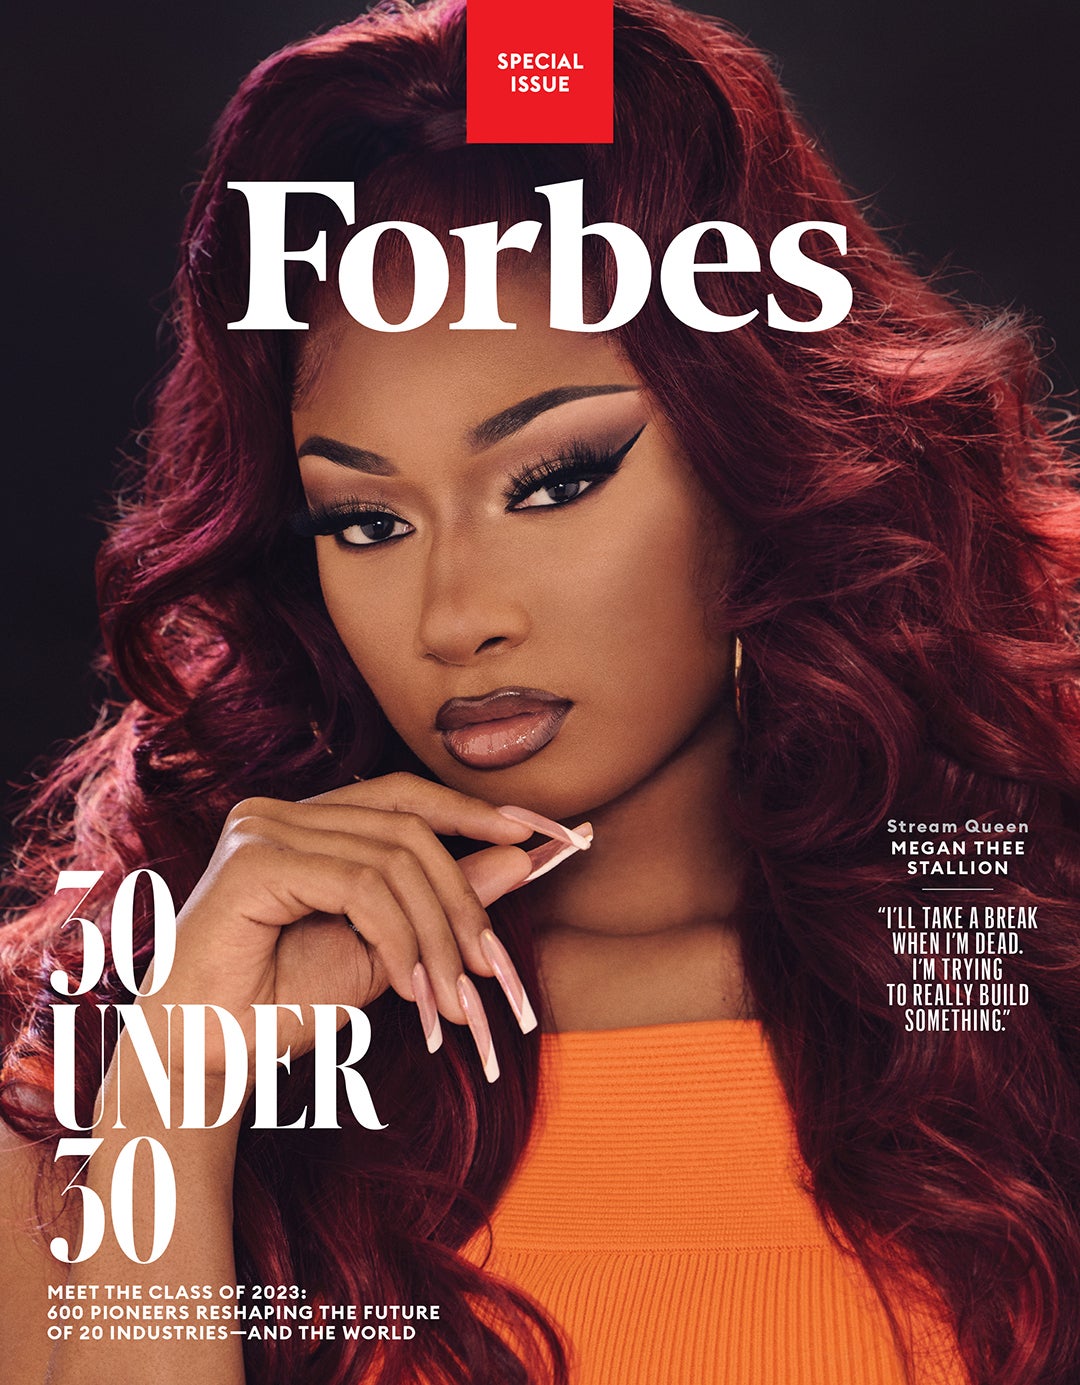 Megan Thee Stallion Makes History With Forbes Cover